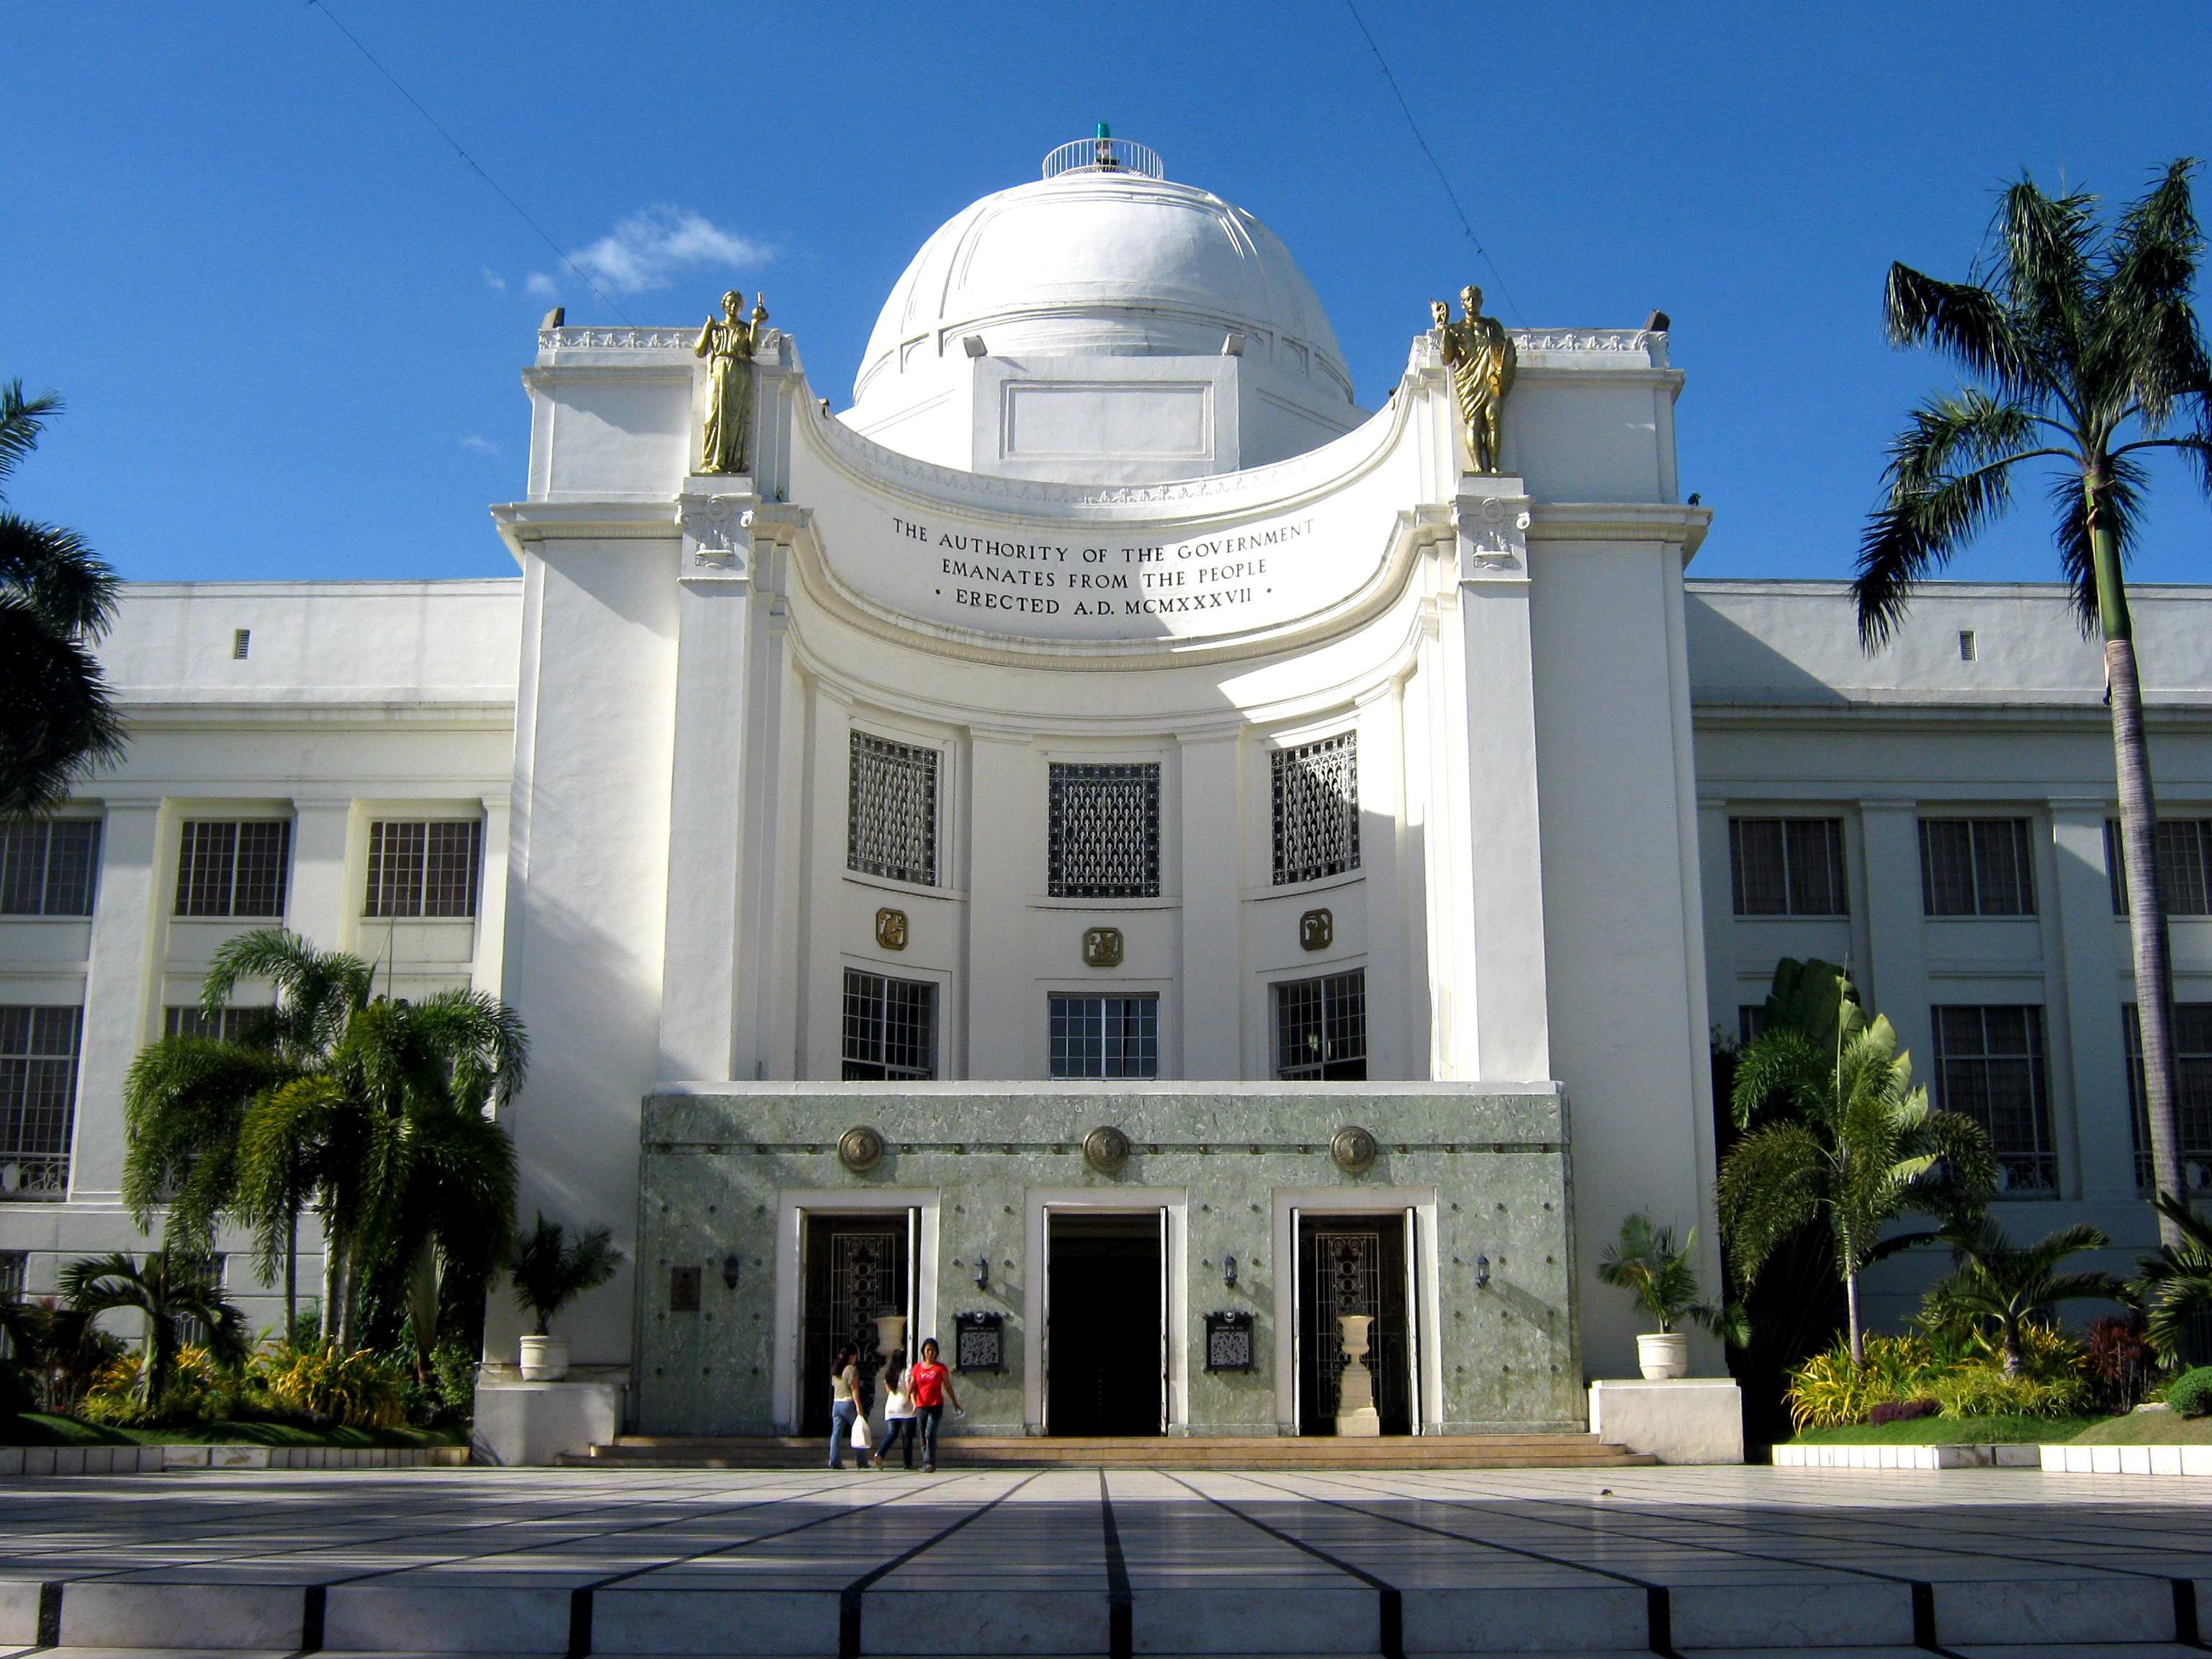 Cebu's Provincial Capitol, venue for the 2015 Global Voices Summit on January 24-25